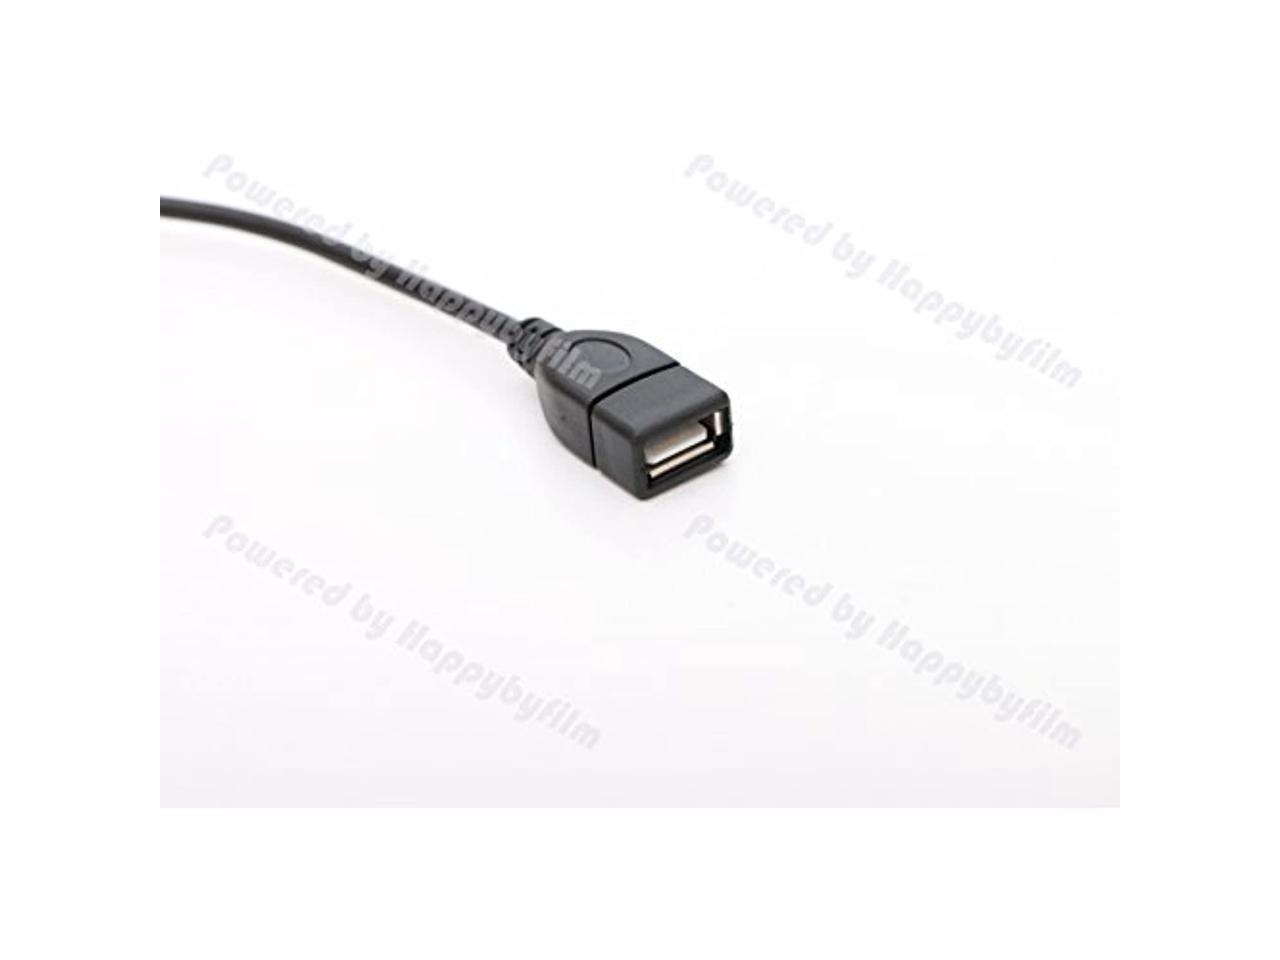 Male 6pin Hirose to USB Data Cable for Trimble S6 S8 Total Stations 